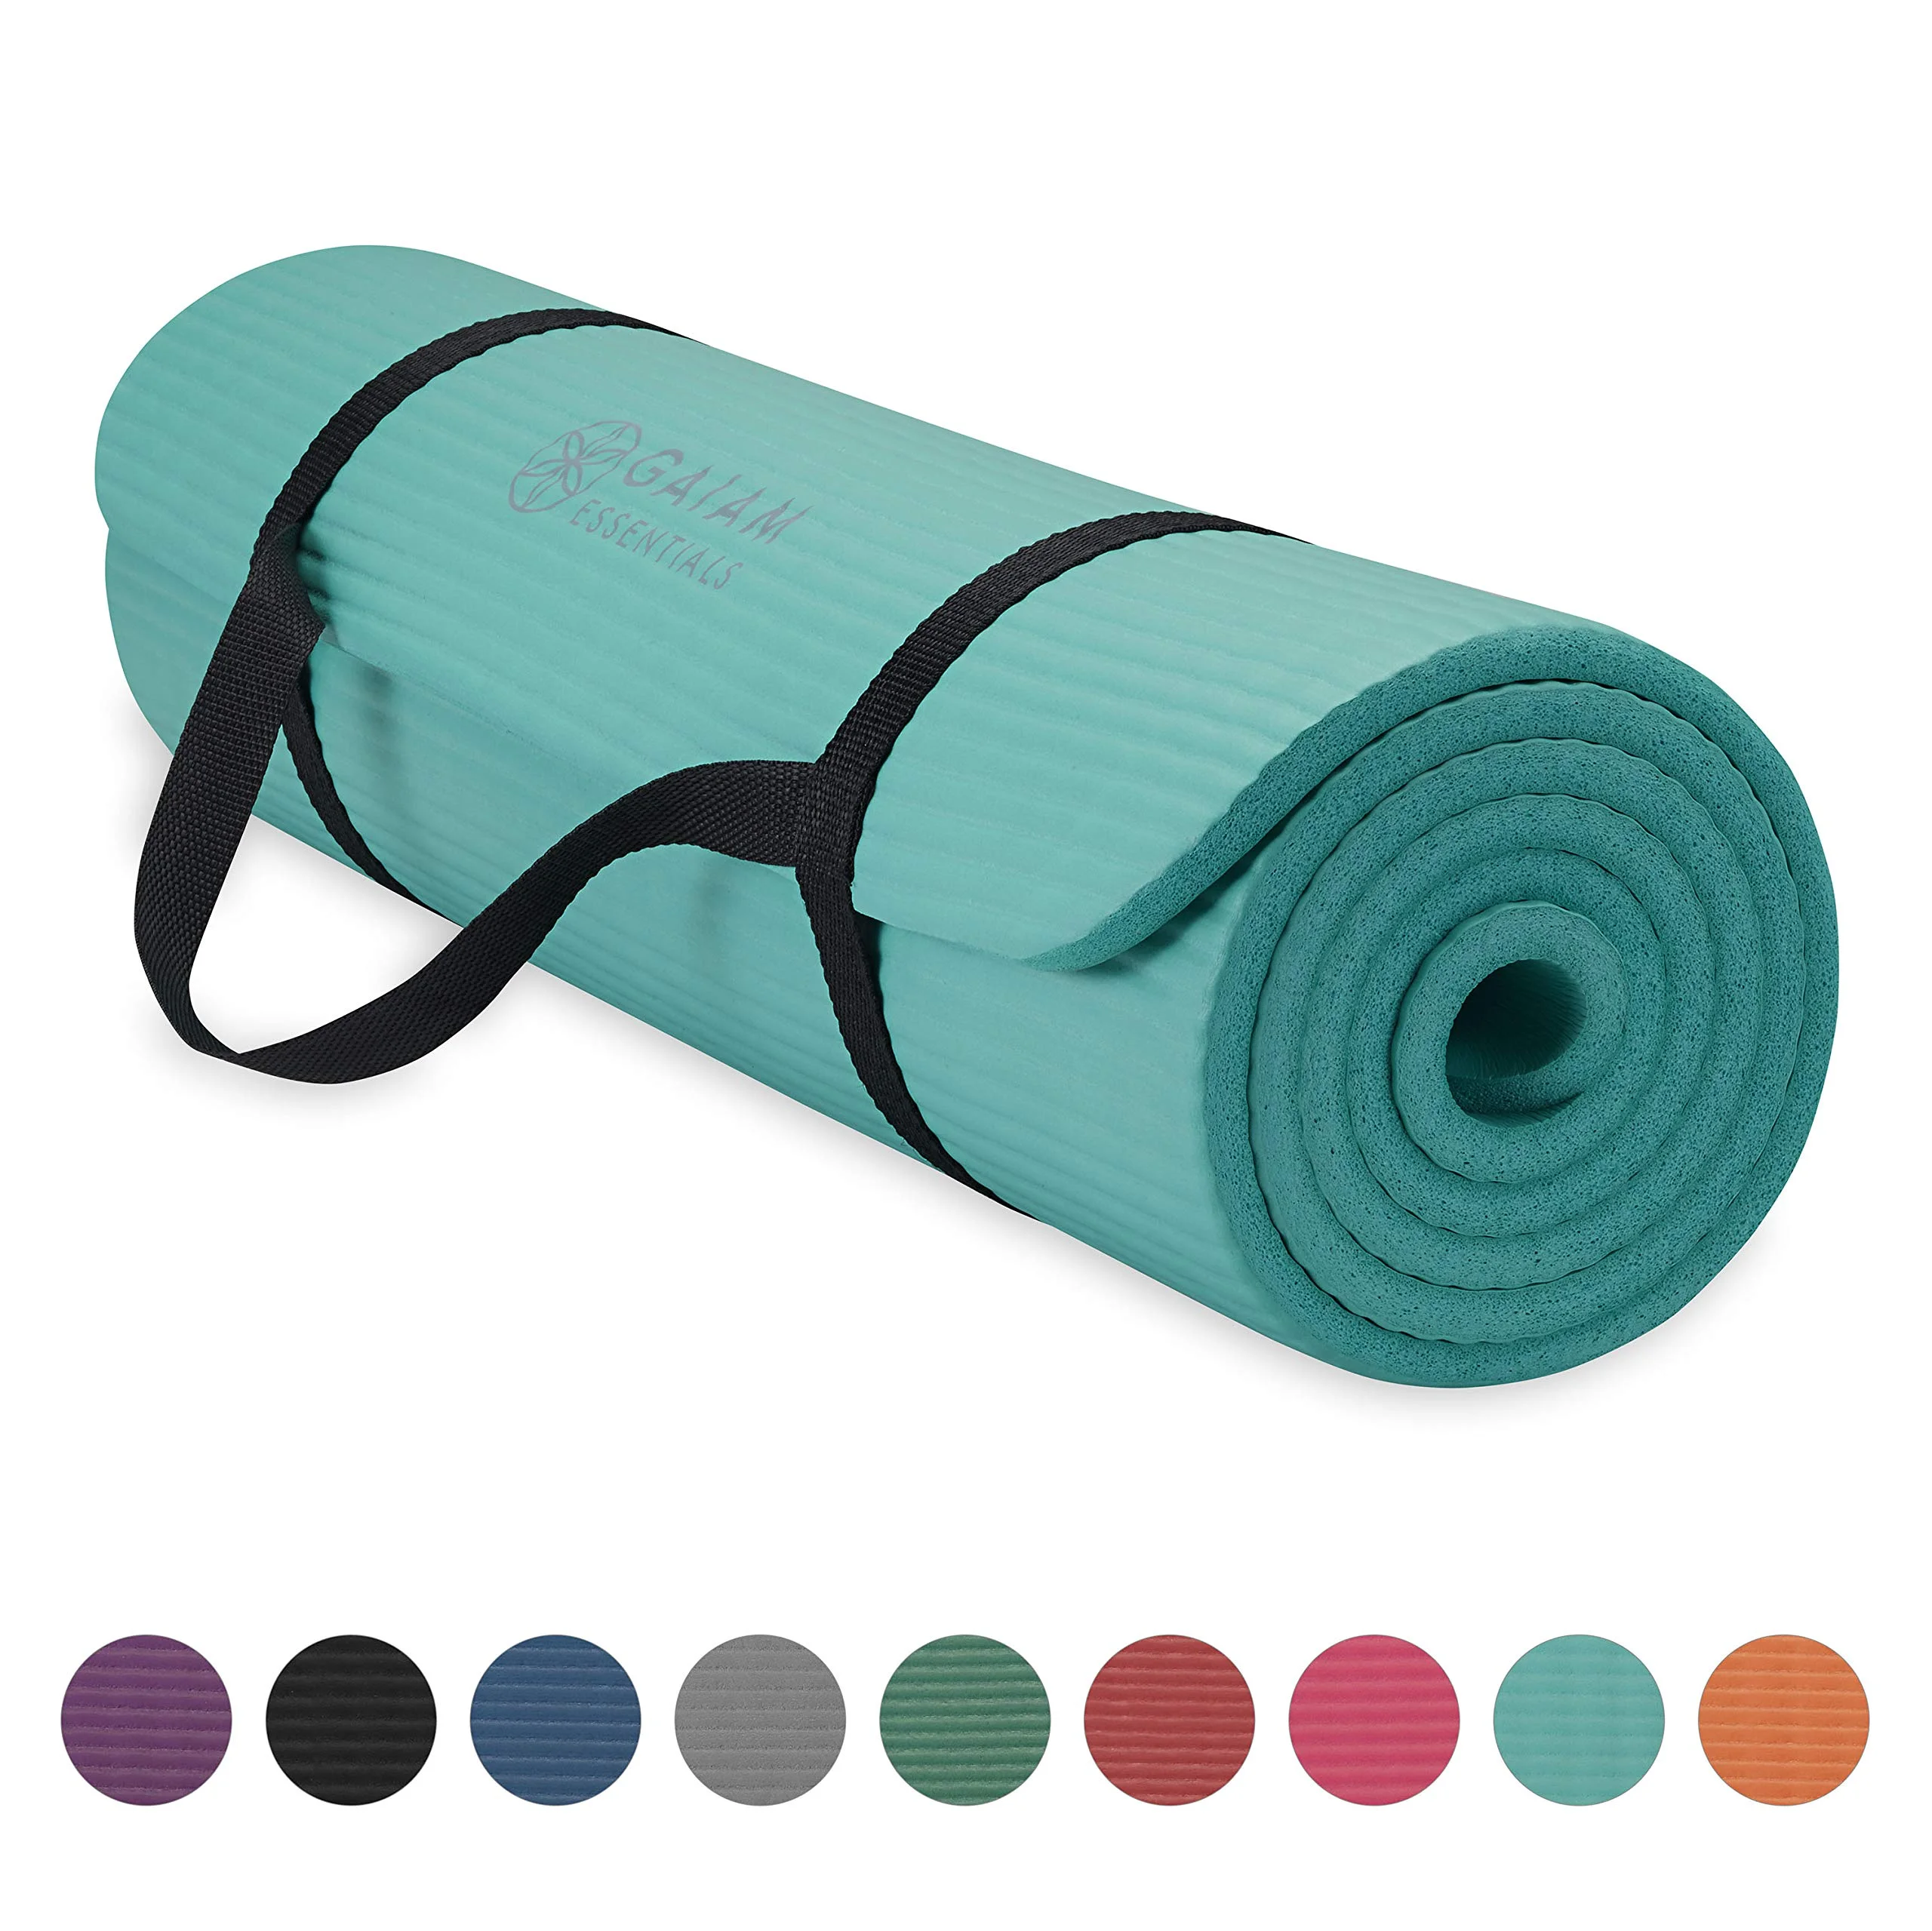 Gaiam + Thick Yoga Mat Fitness & Exercise Mat with Easy-Cinch